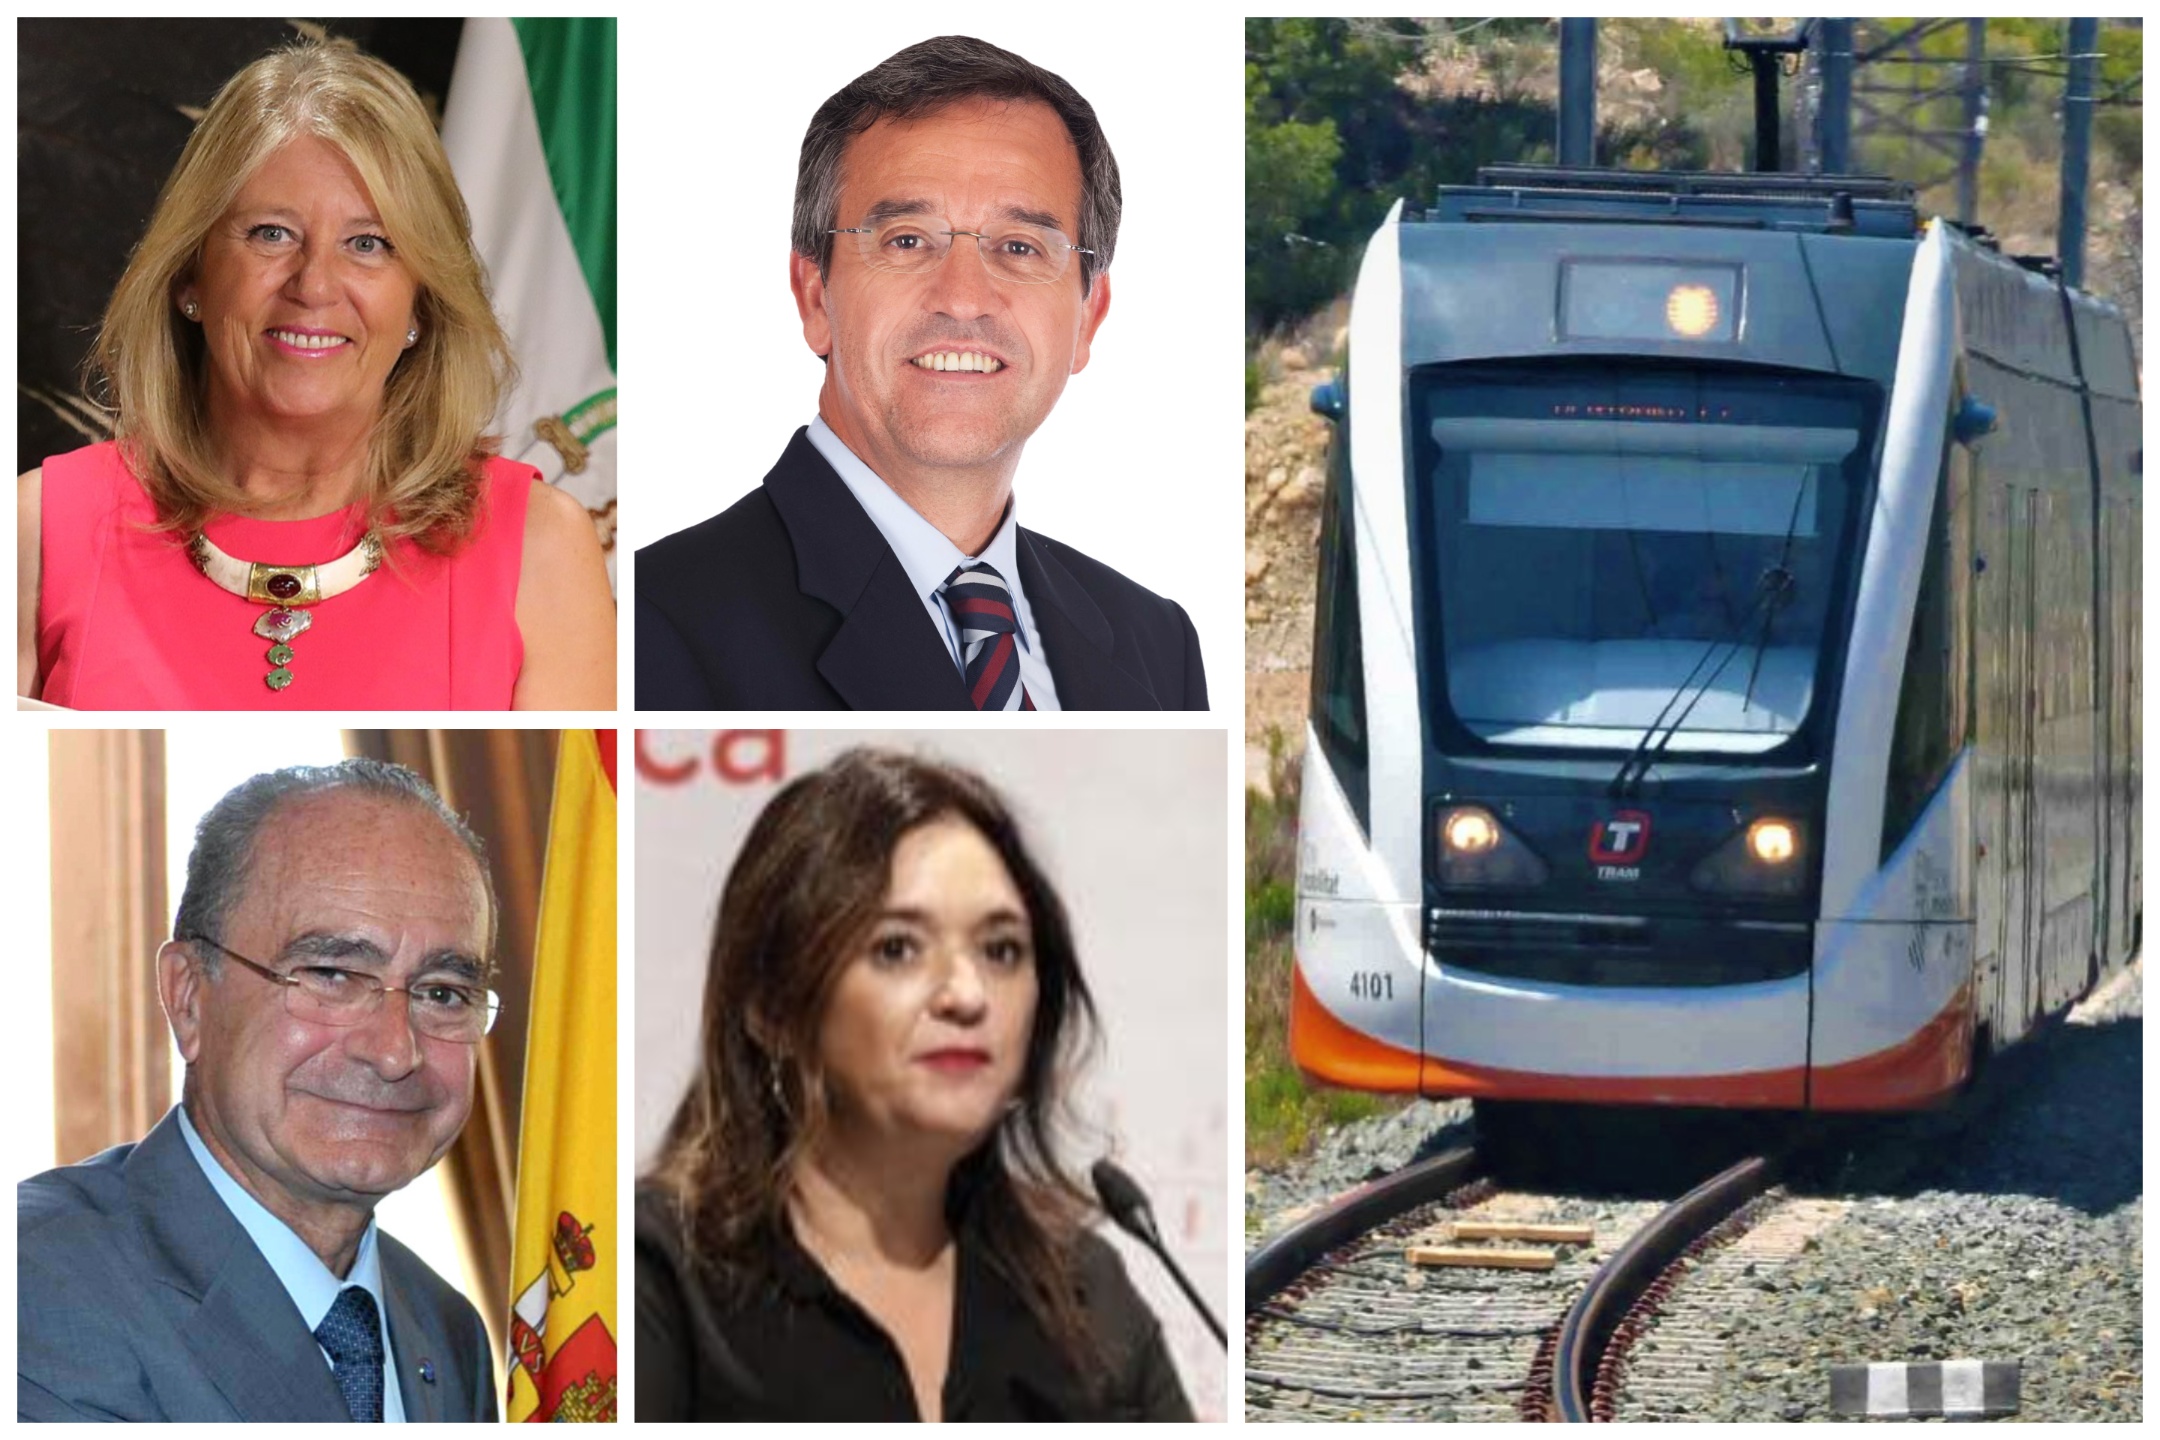 Malaga plans to approve the Costa del Sol train project and elimination of toll roads within a year